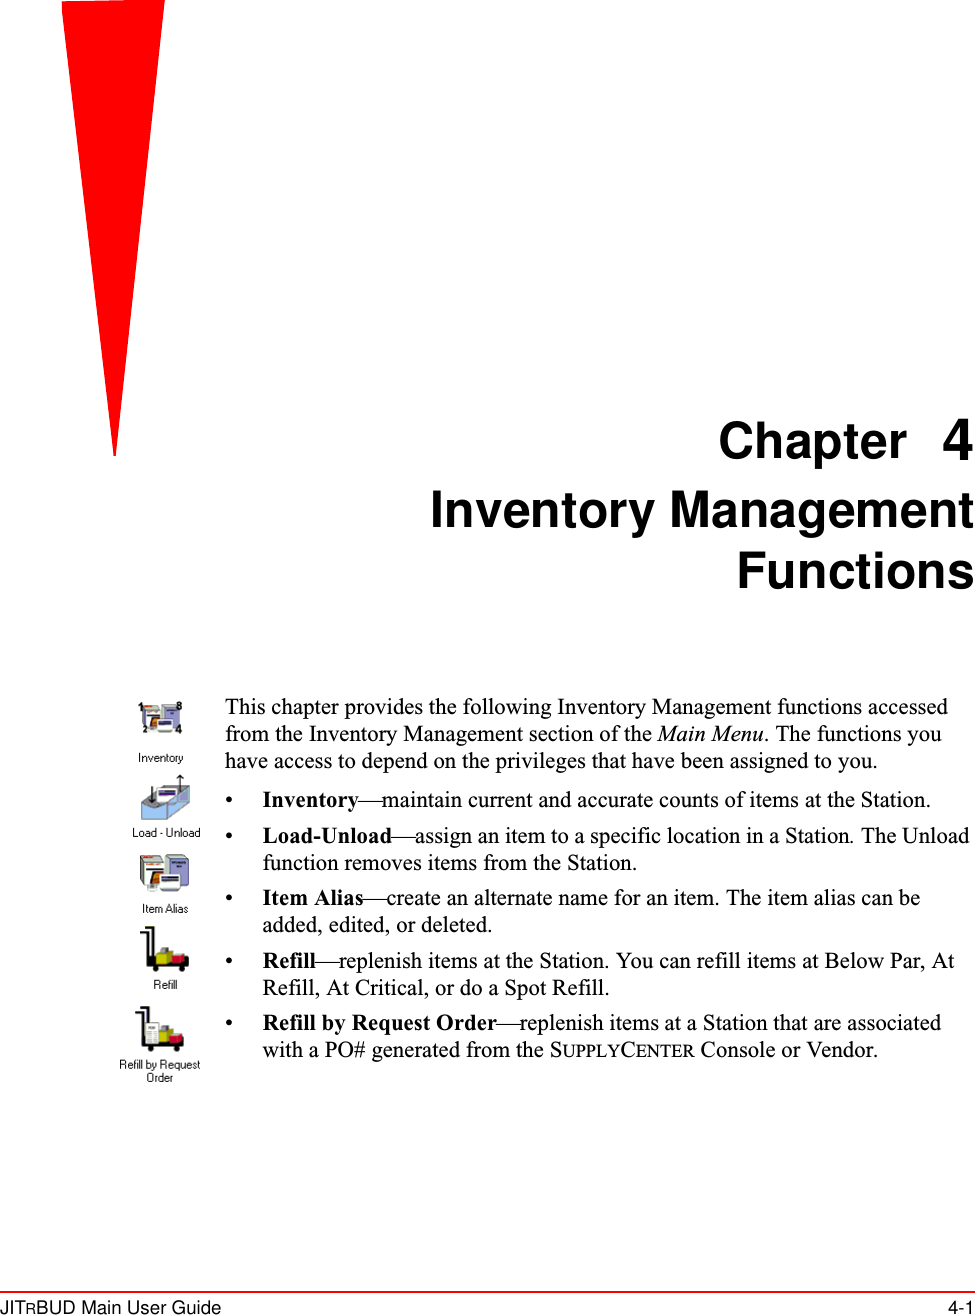 JITRBUD Main User Guide 4-1Chapter 4Inventory ManagementFunctionsThis chapter provides the following Inventory Management functions accessed from the Inventory Management section of the Main Menu. The functions you have access to depend on the privileges that have been assigned to you.•Inventory—maintain current and accurate counts of items at the Station.•Load-Unload—assign an item to a specific location in a Station. The Unload function removes items from the Station.•Item Alias—create an alternate name for an item. The item alias can be added, edited, or deleted.•Refill—replenish items at the Station. You can refill items at Below Par, At Refill, At Critical, or do a Spot Refill.•Refill by Request Order—replenish items at a Station that are associated with a PO# generated from the SUPPLYCENTER Console or Vendor.